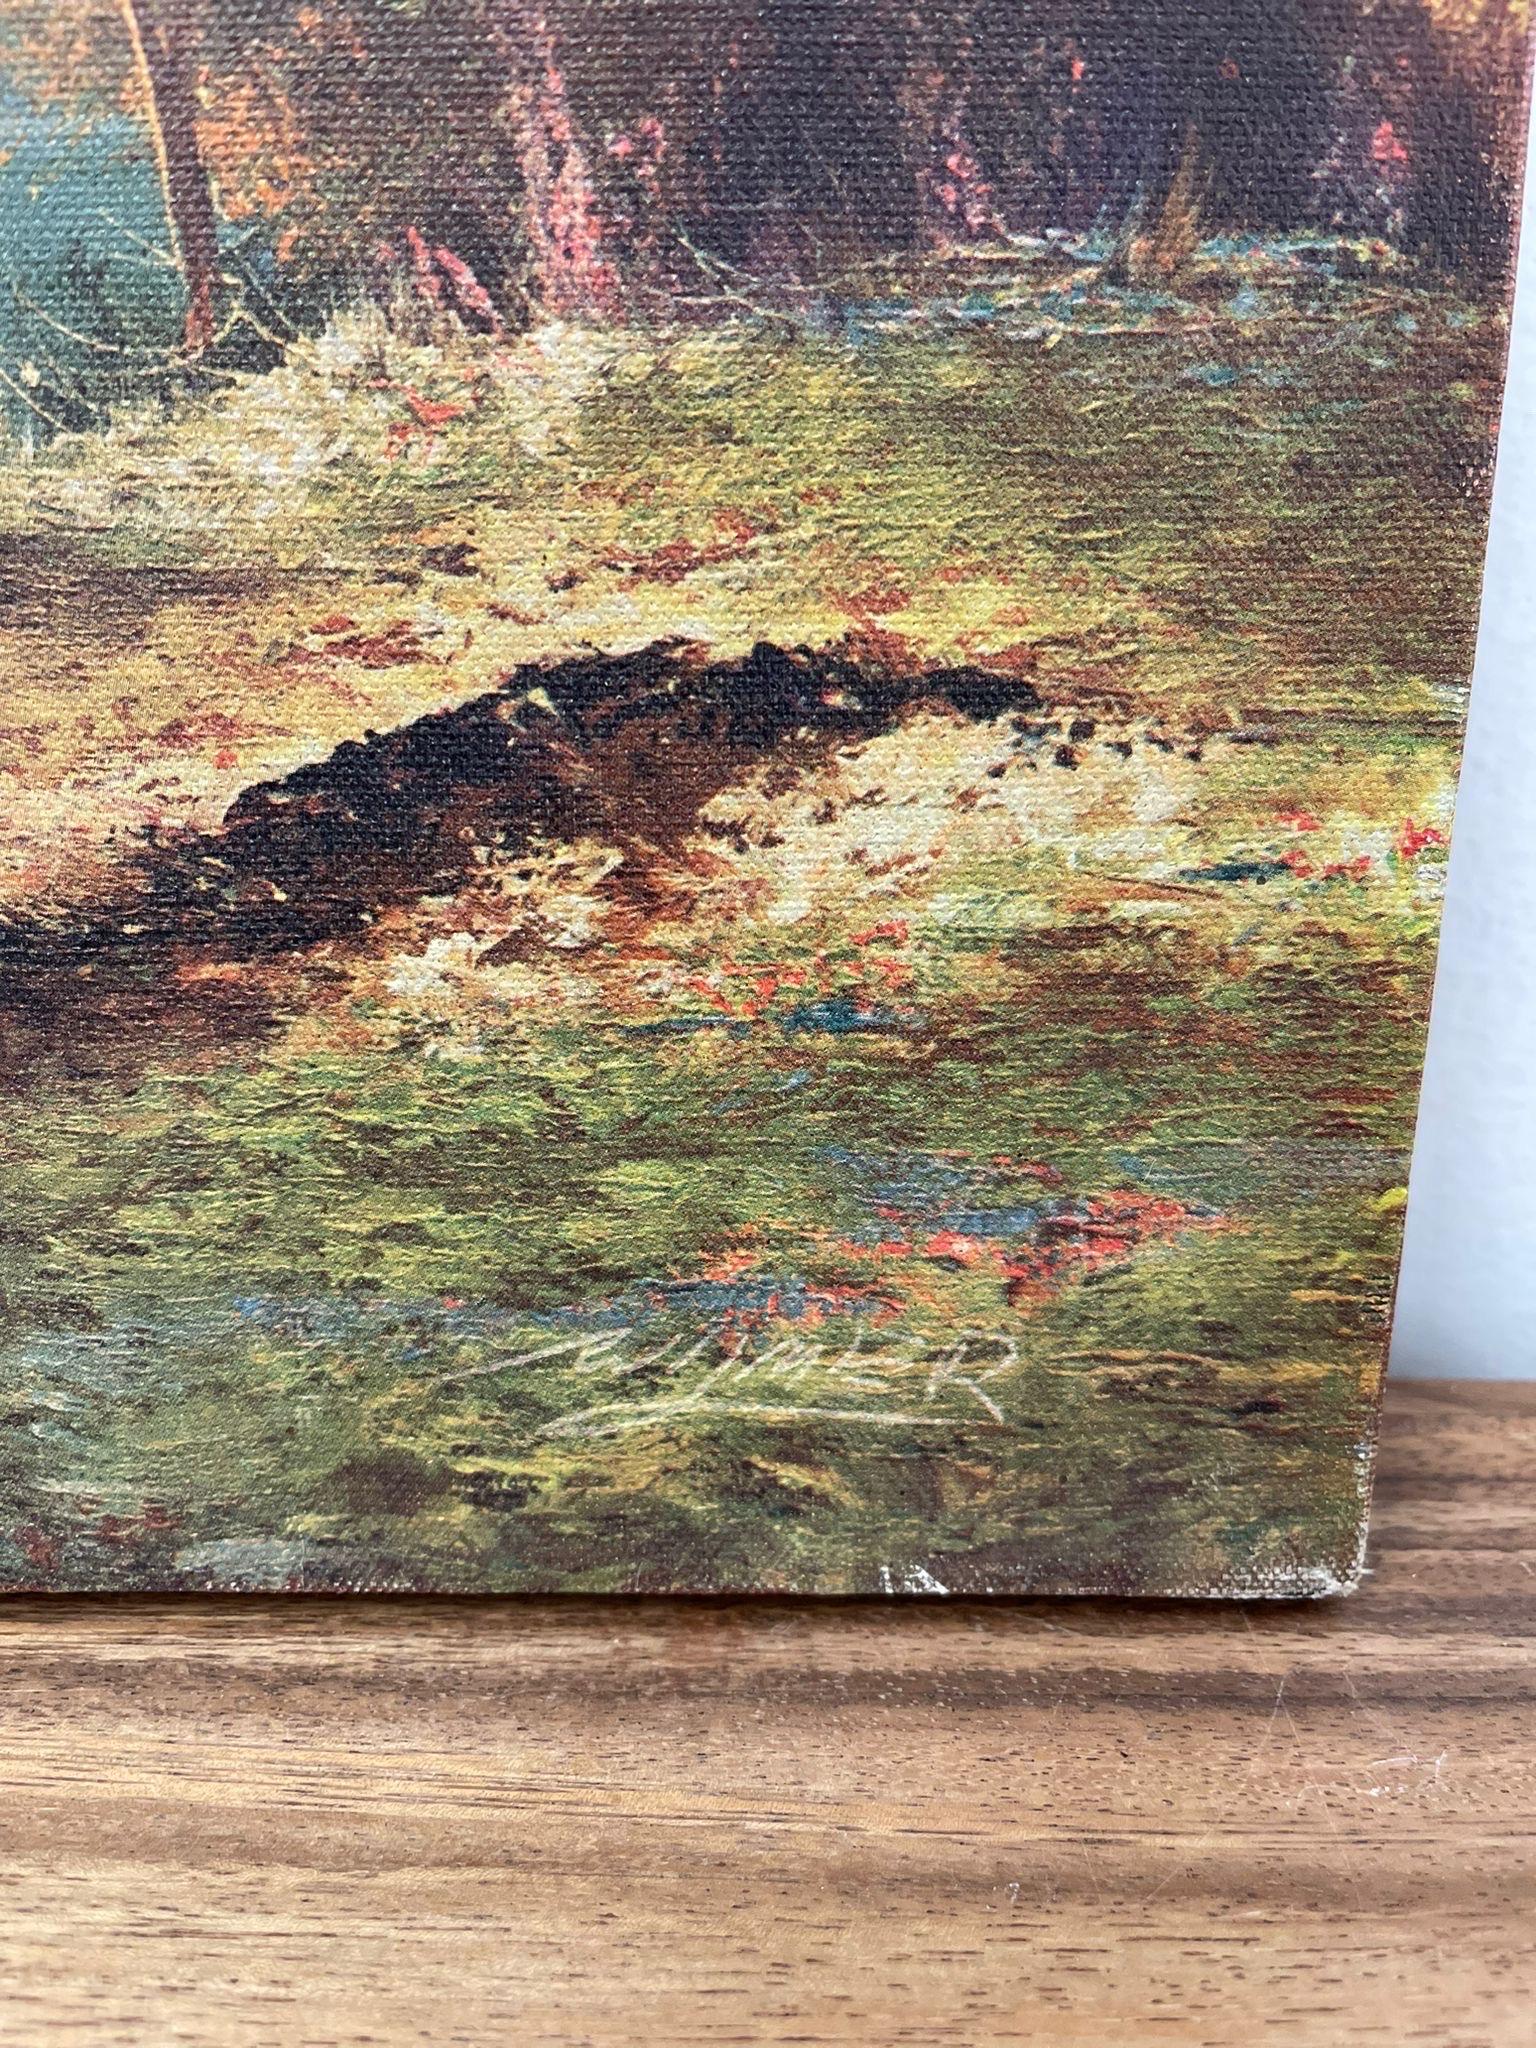 Late 20th Century Vintage Landscape Print on Canvas. Mountains Over a Lake. For Sale